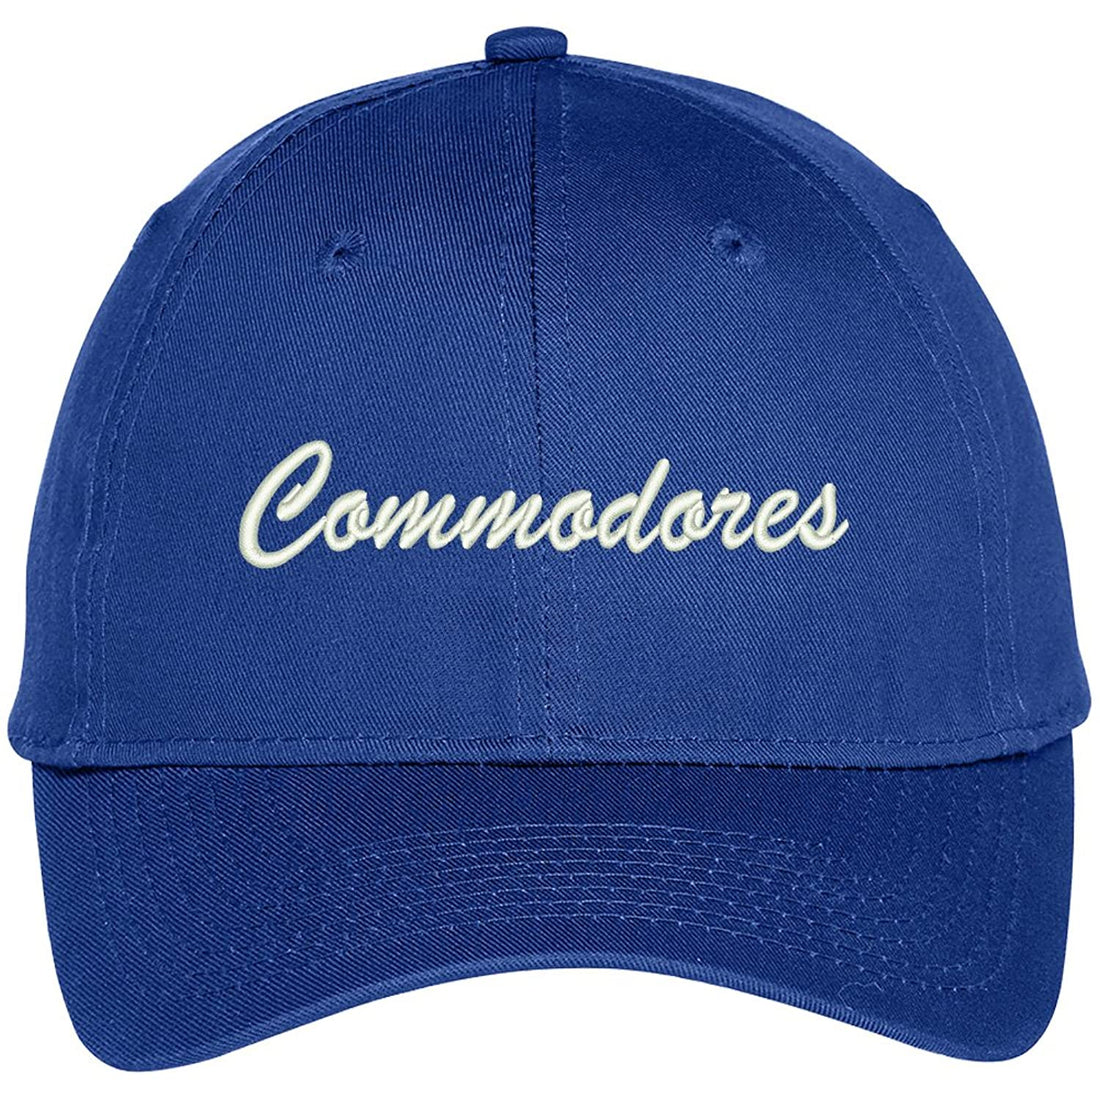 Trendy Apparel Shop Commodores Embroidered Team Nickname Mascot Cap